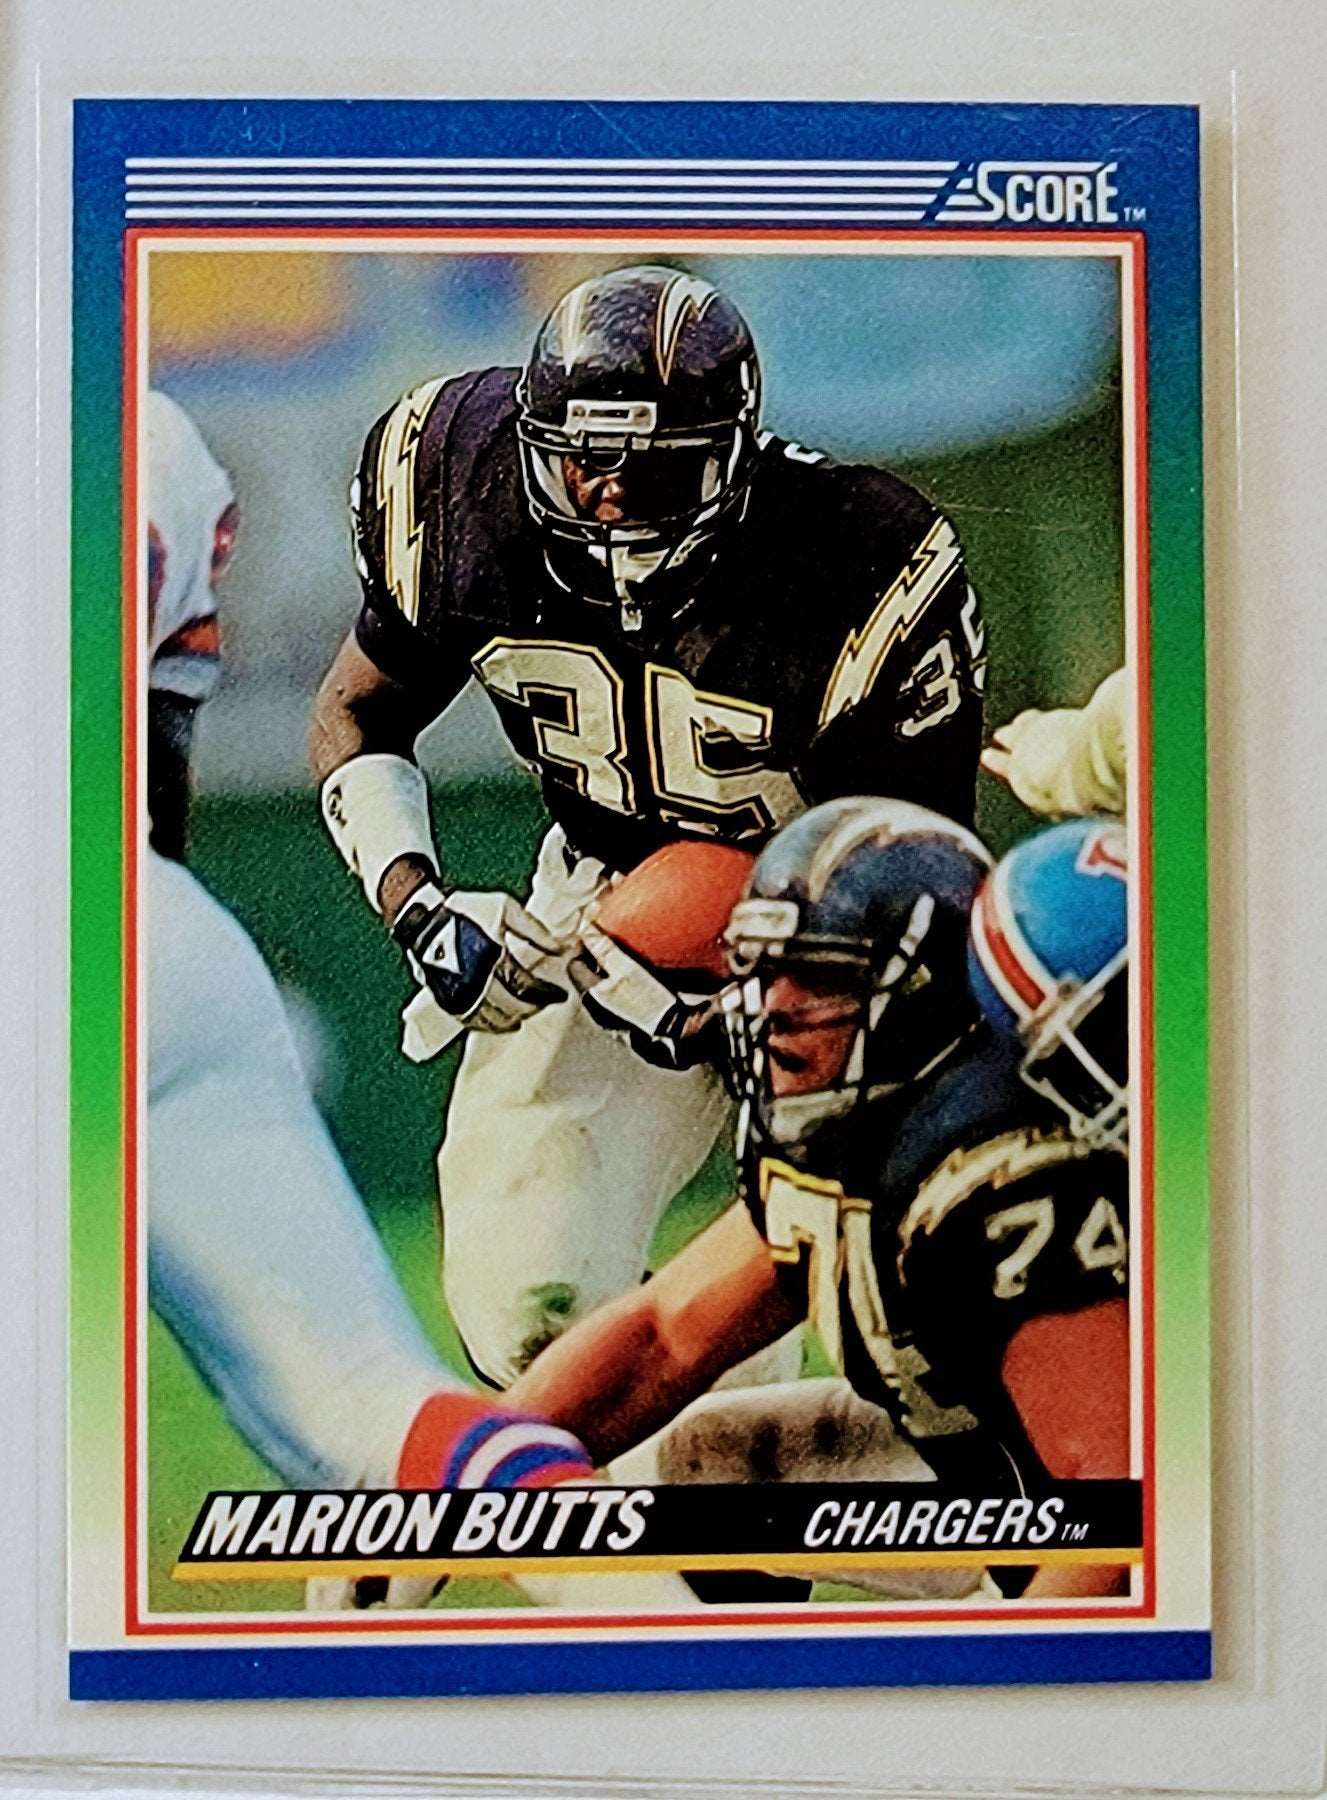 1990 Score Marion Butts Football Card AVM1 simple Xclusive Collectibles   